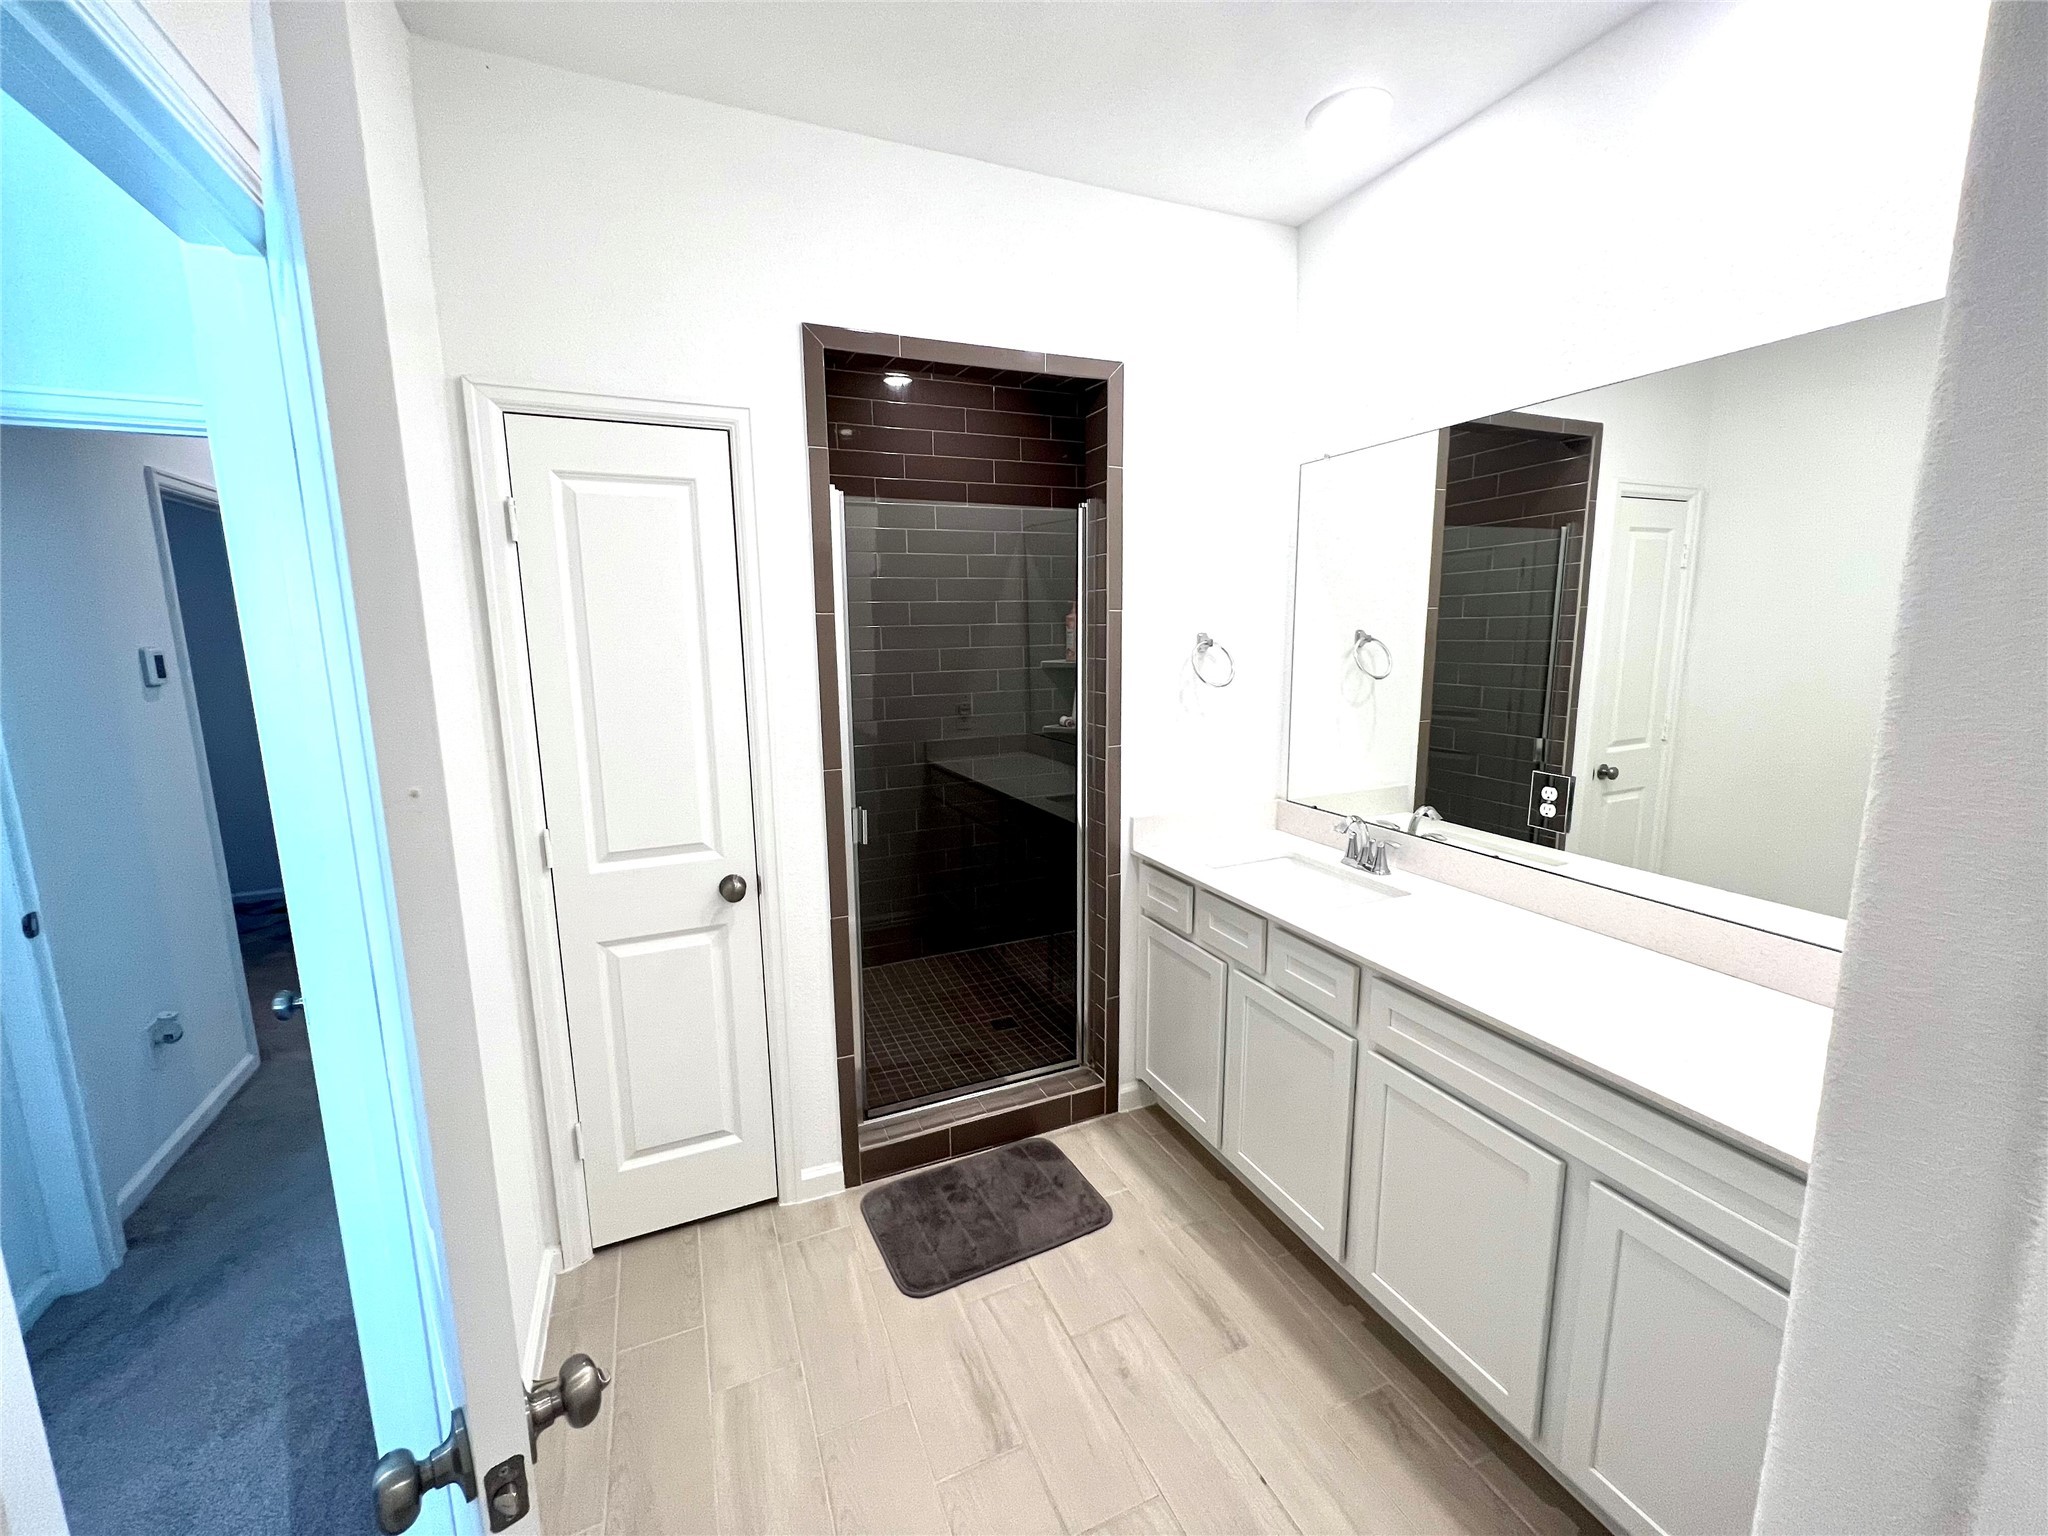 Luxurious primary bathroom with double sinks, huge shower, and walk-in closet.